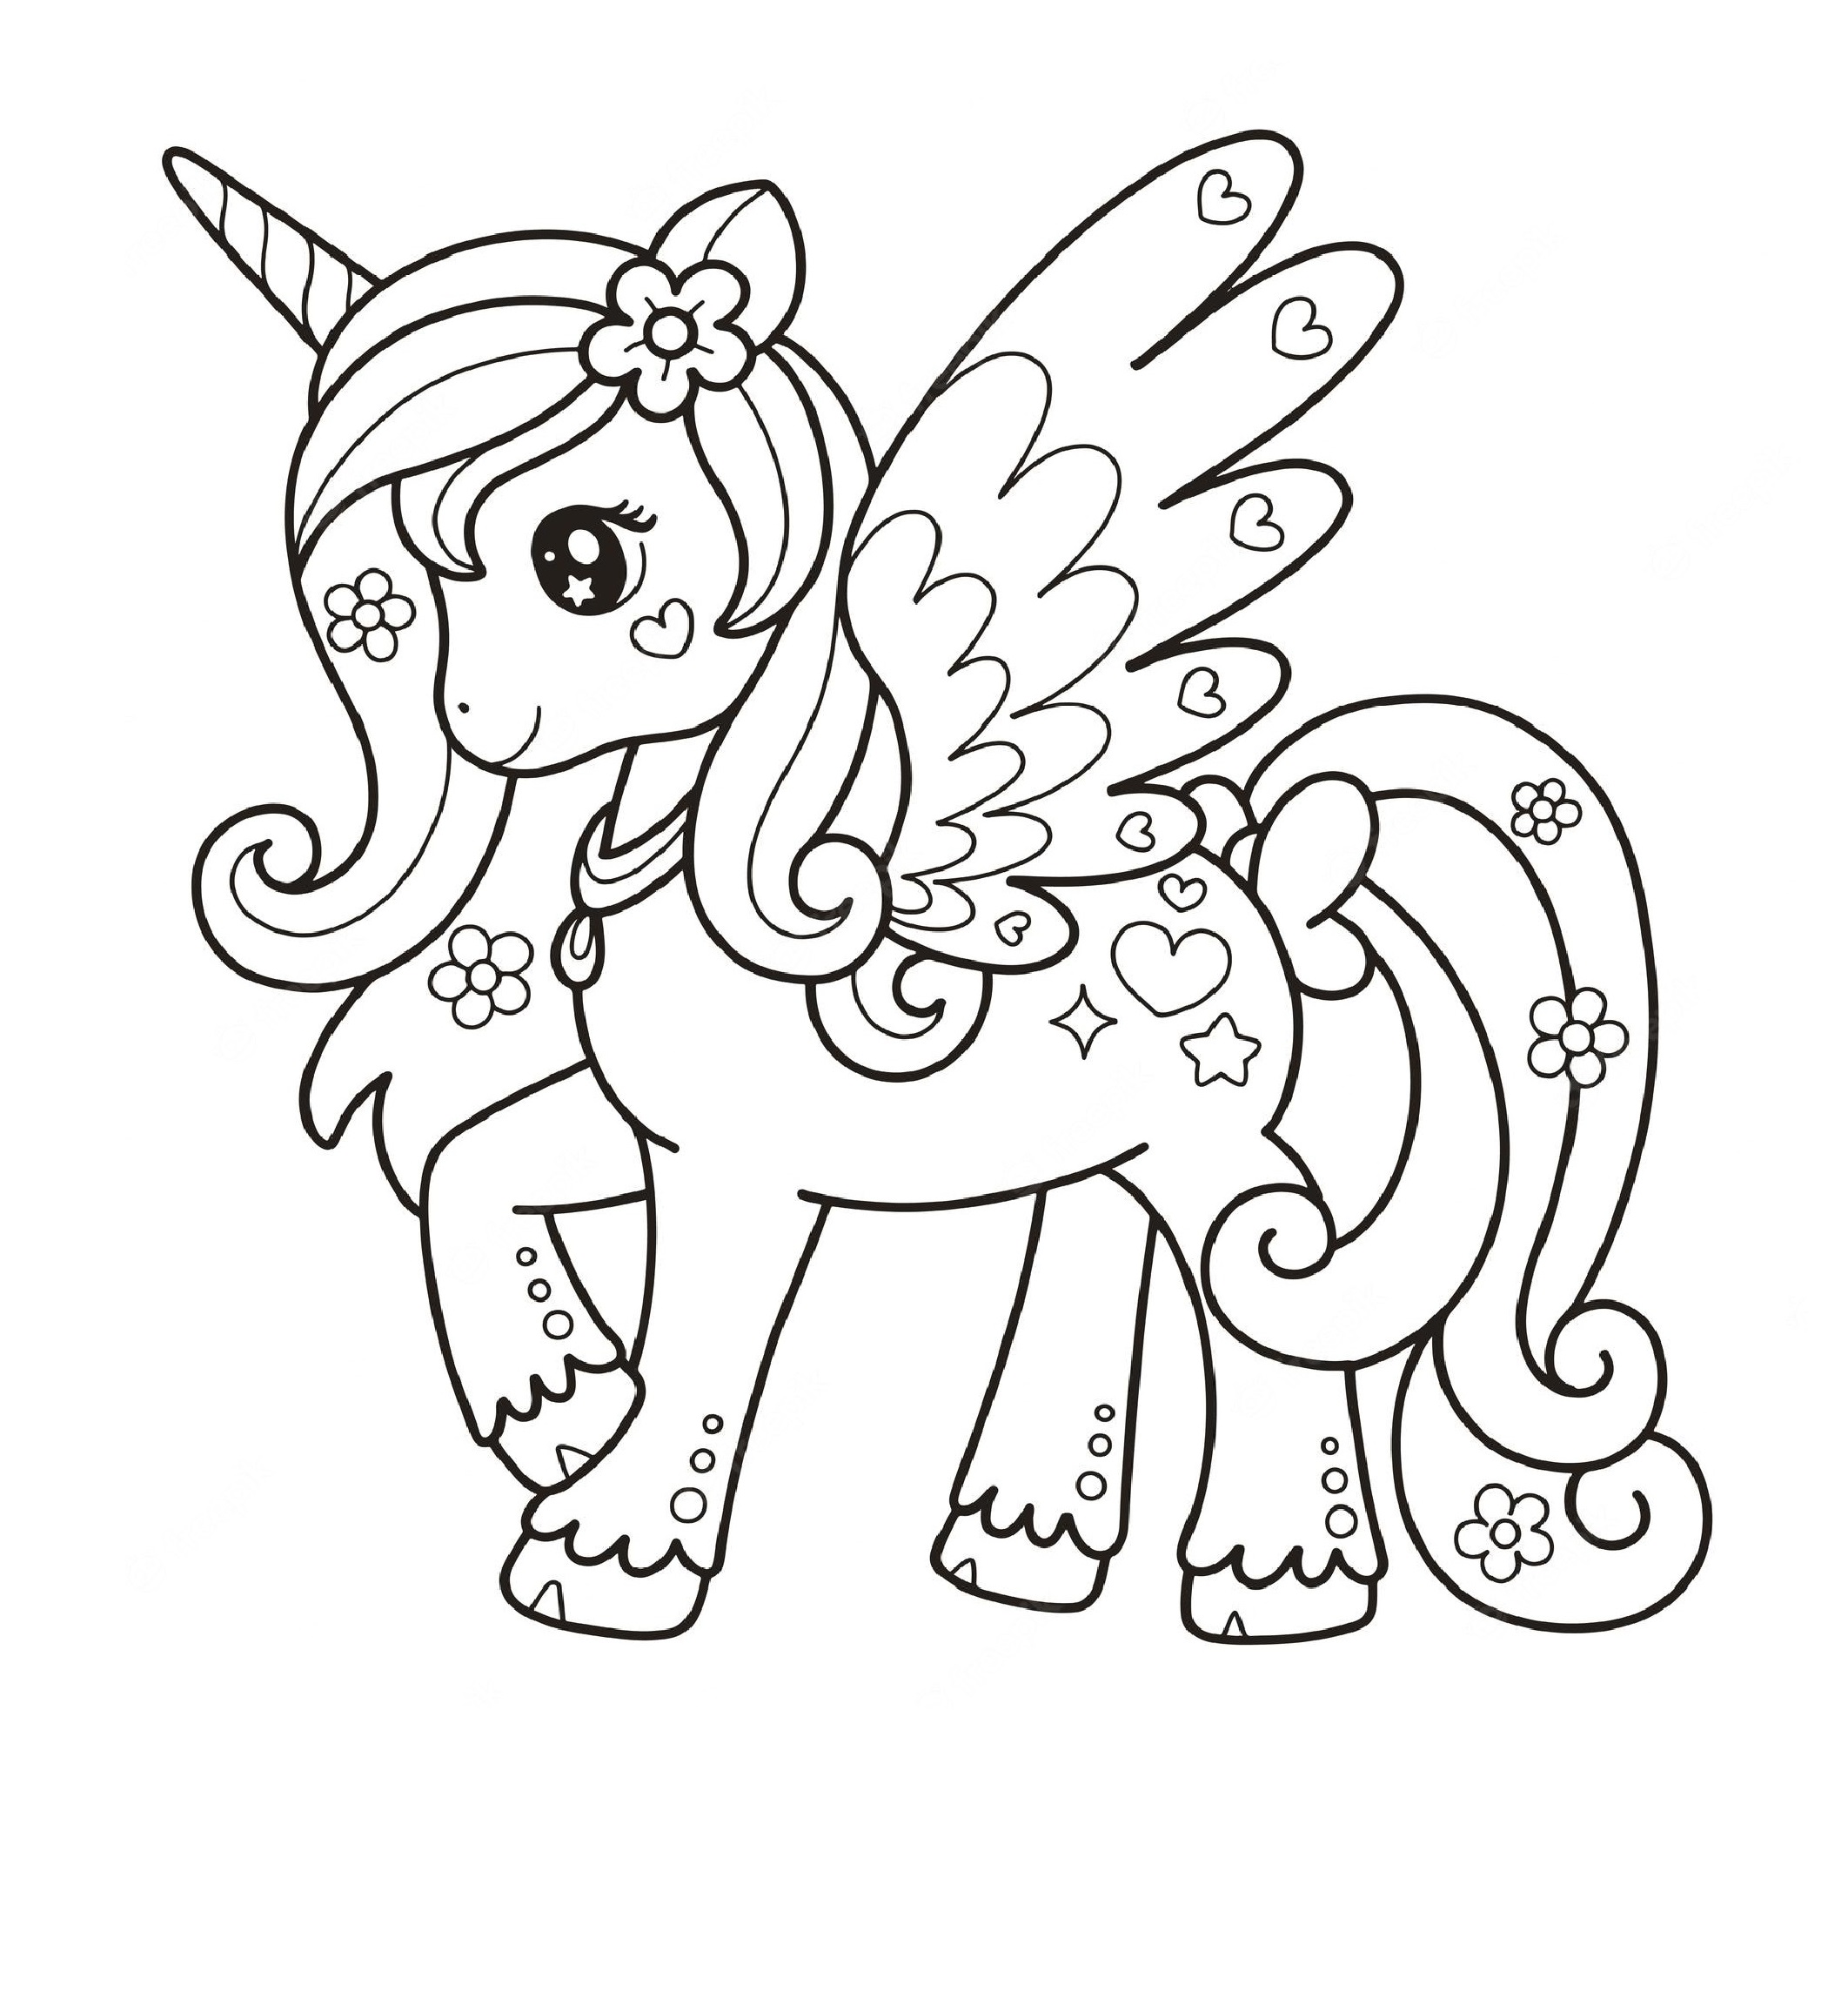 Printable Lovely Unicorn Coloring Page for kids.